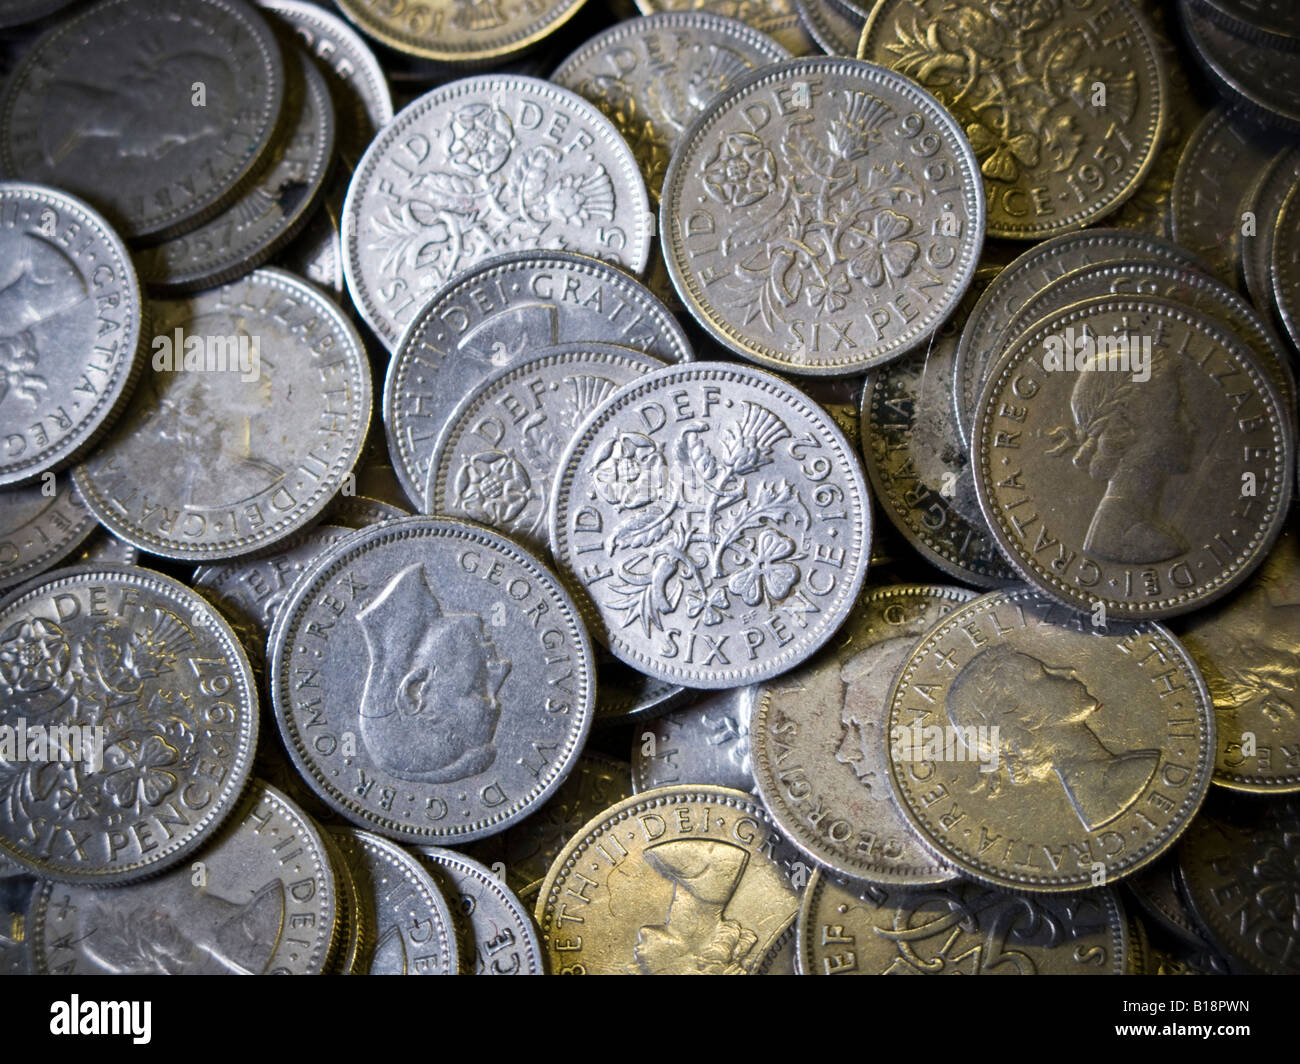 a Pile of old British 'silver' sixpenny pieces pre decimal era 6d or a tanner or half a shilling worth 2.5 pence in new money Stock Photo